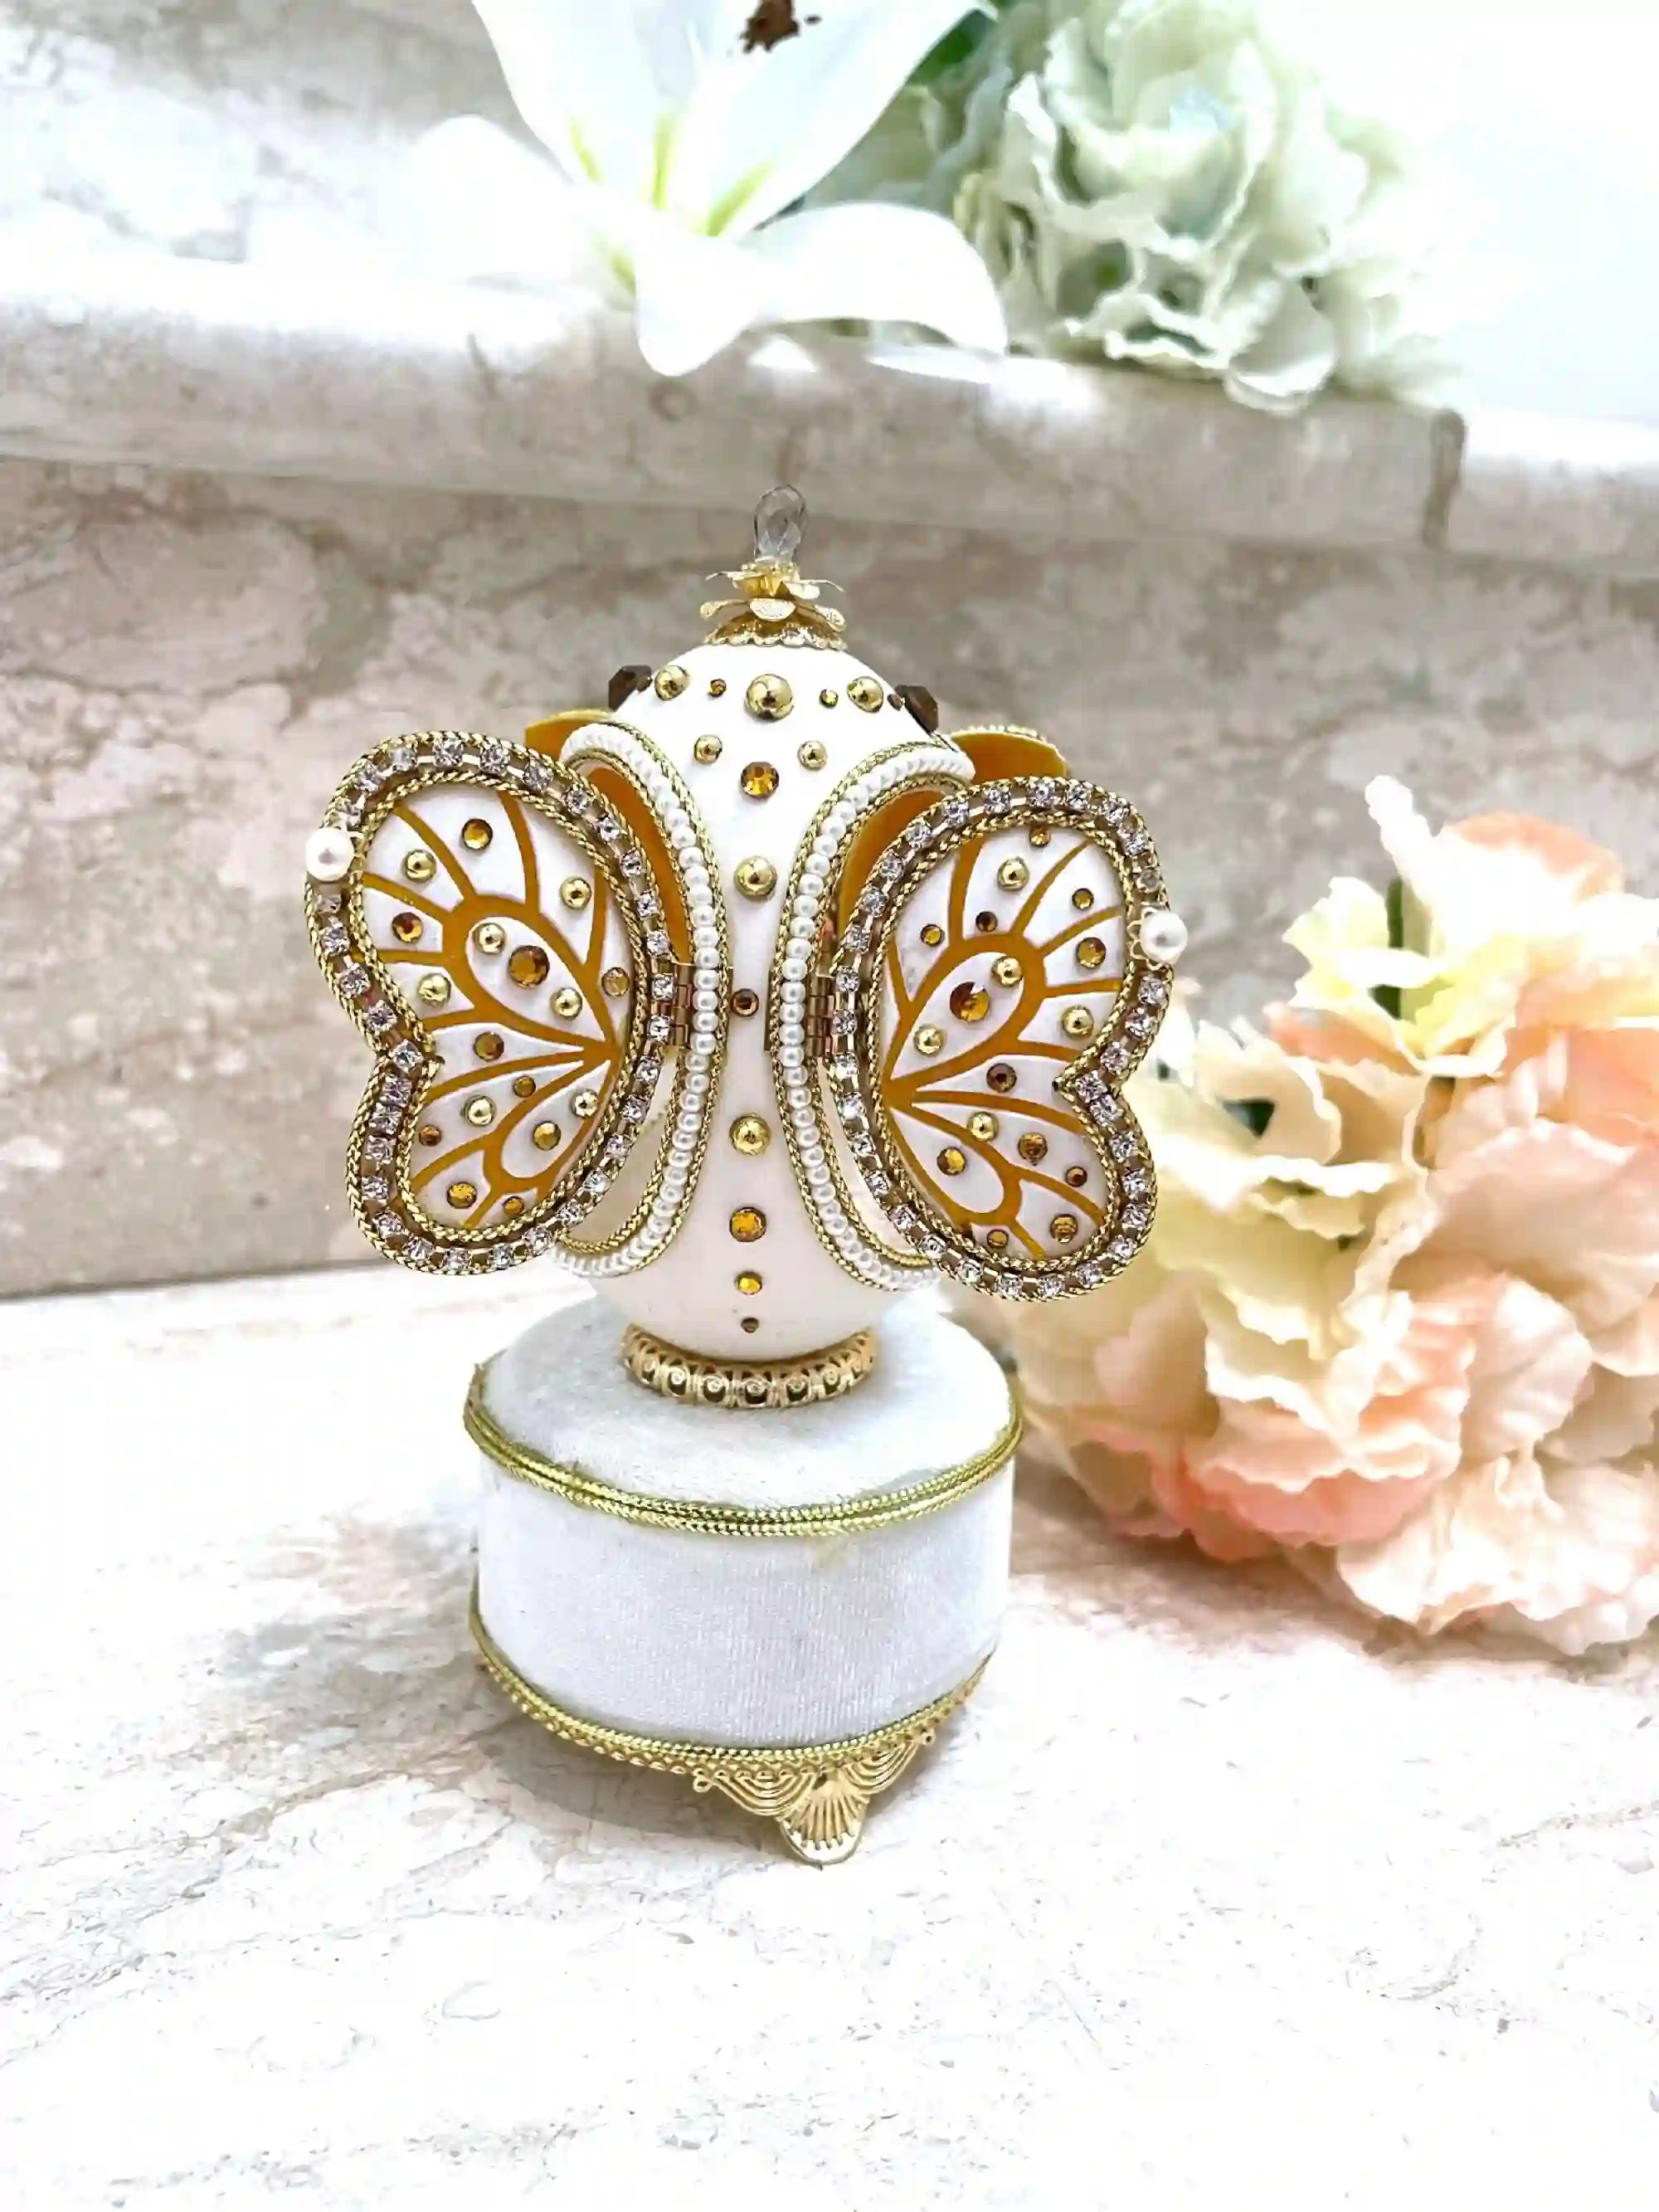 Faberge style Luxury Jewelry Box 24k GOLD CITRINE Gift for Her HANDMADE Natural Egg Faberge egg Ornament Ballerina Lover Faberge egg Music 